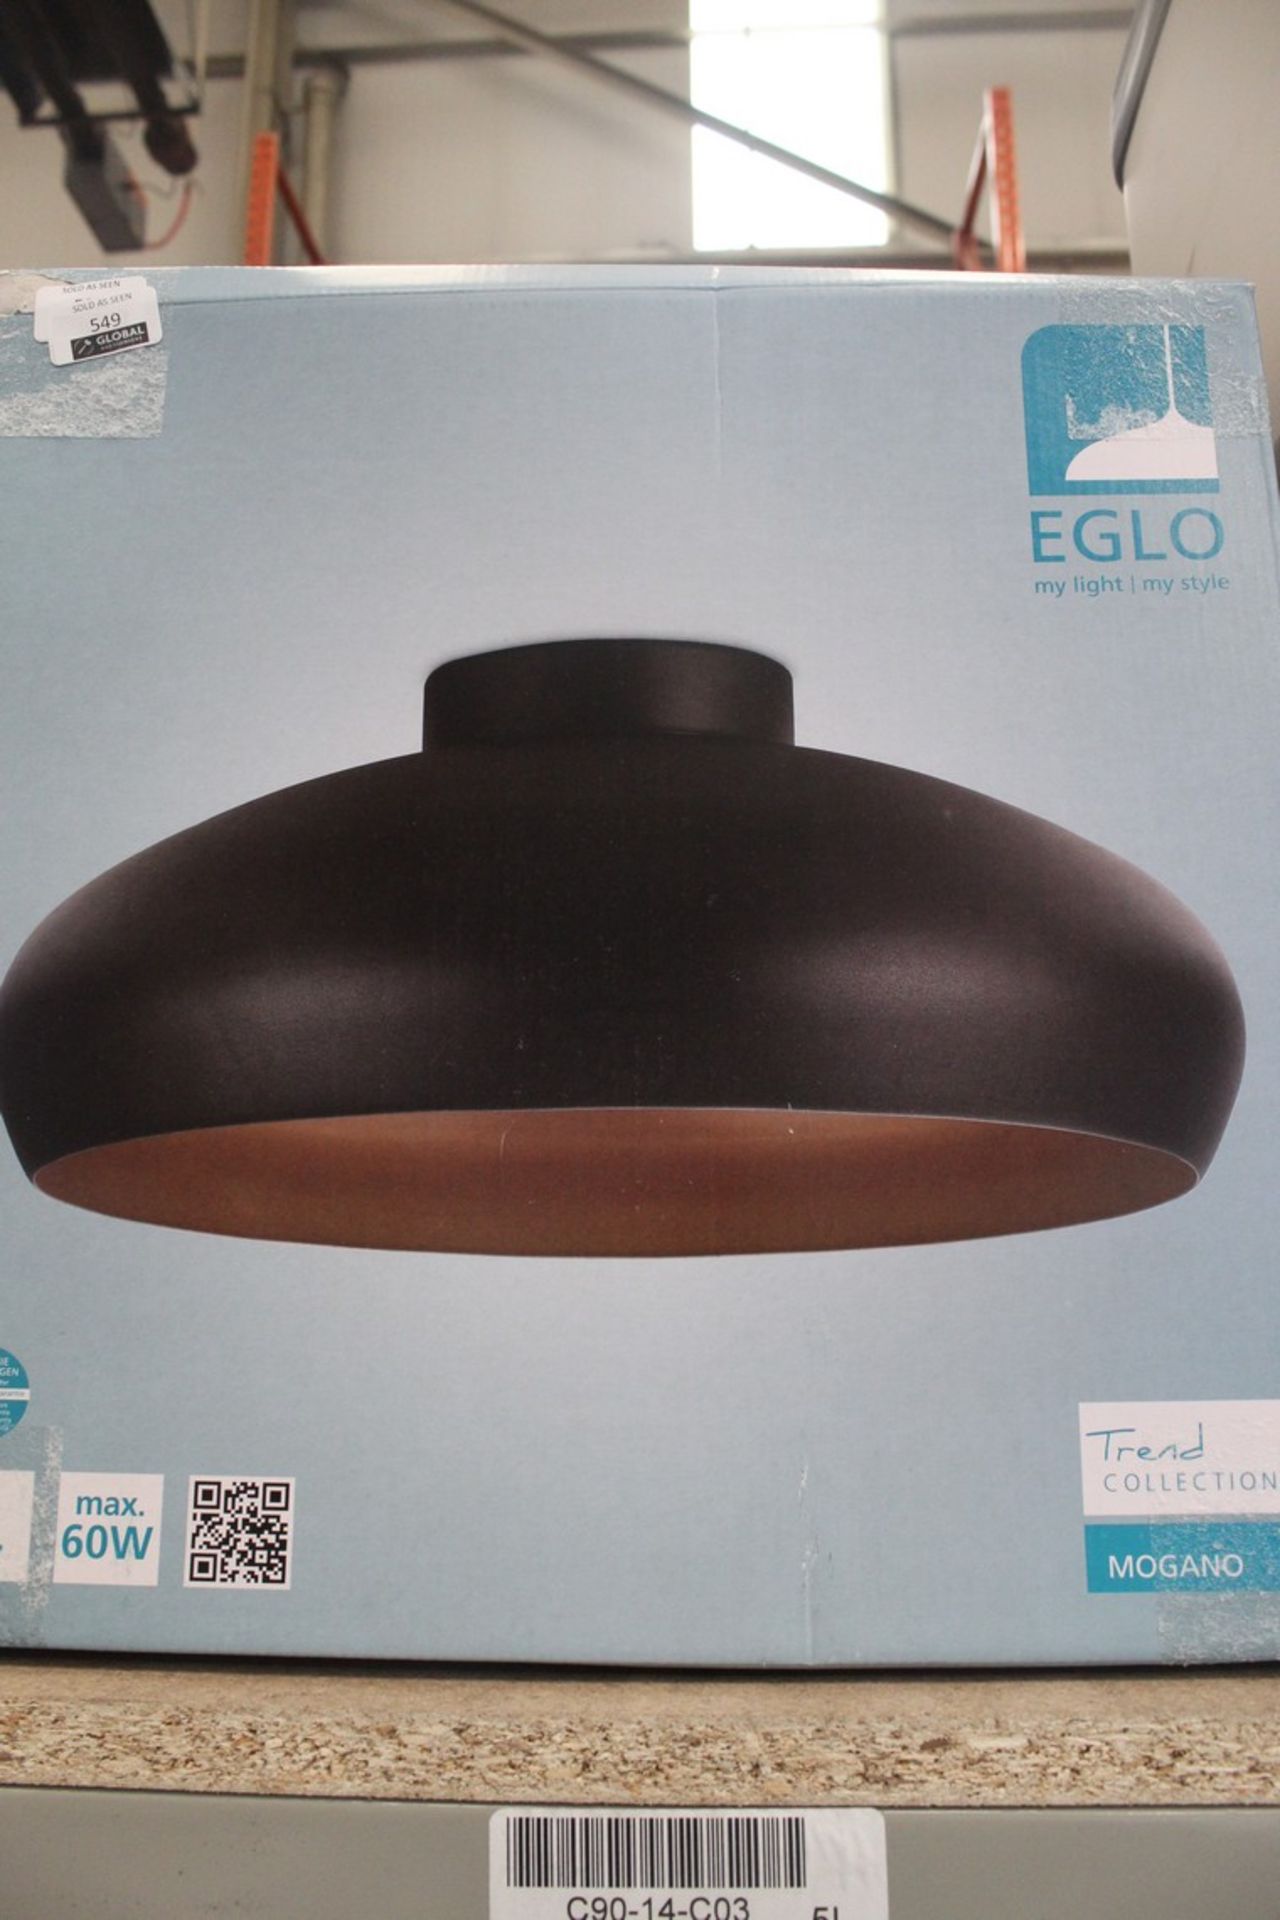 Boxed Eglo Trend Collection Mogano Light - Image 2 of 2